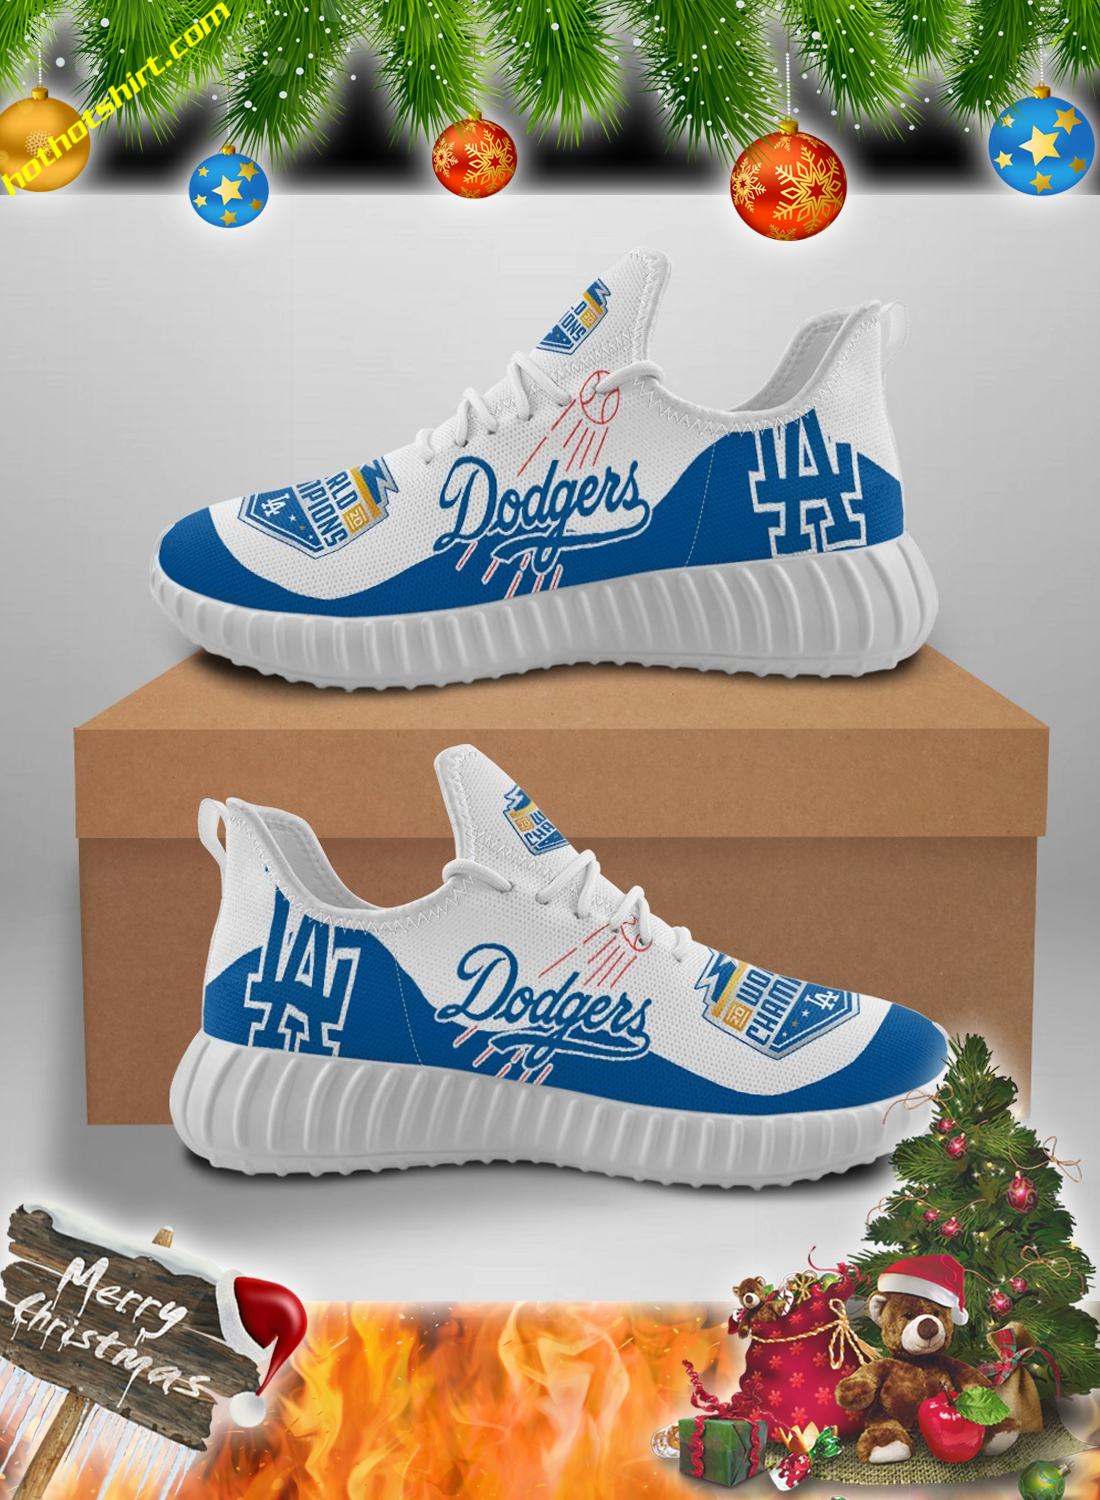 Los angeles dodgers 2020 world series champions sneaker – Hothot 041120